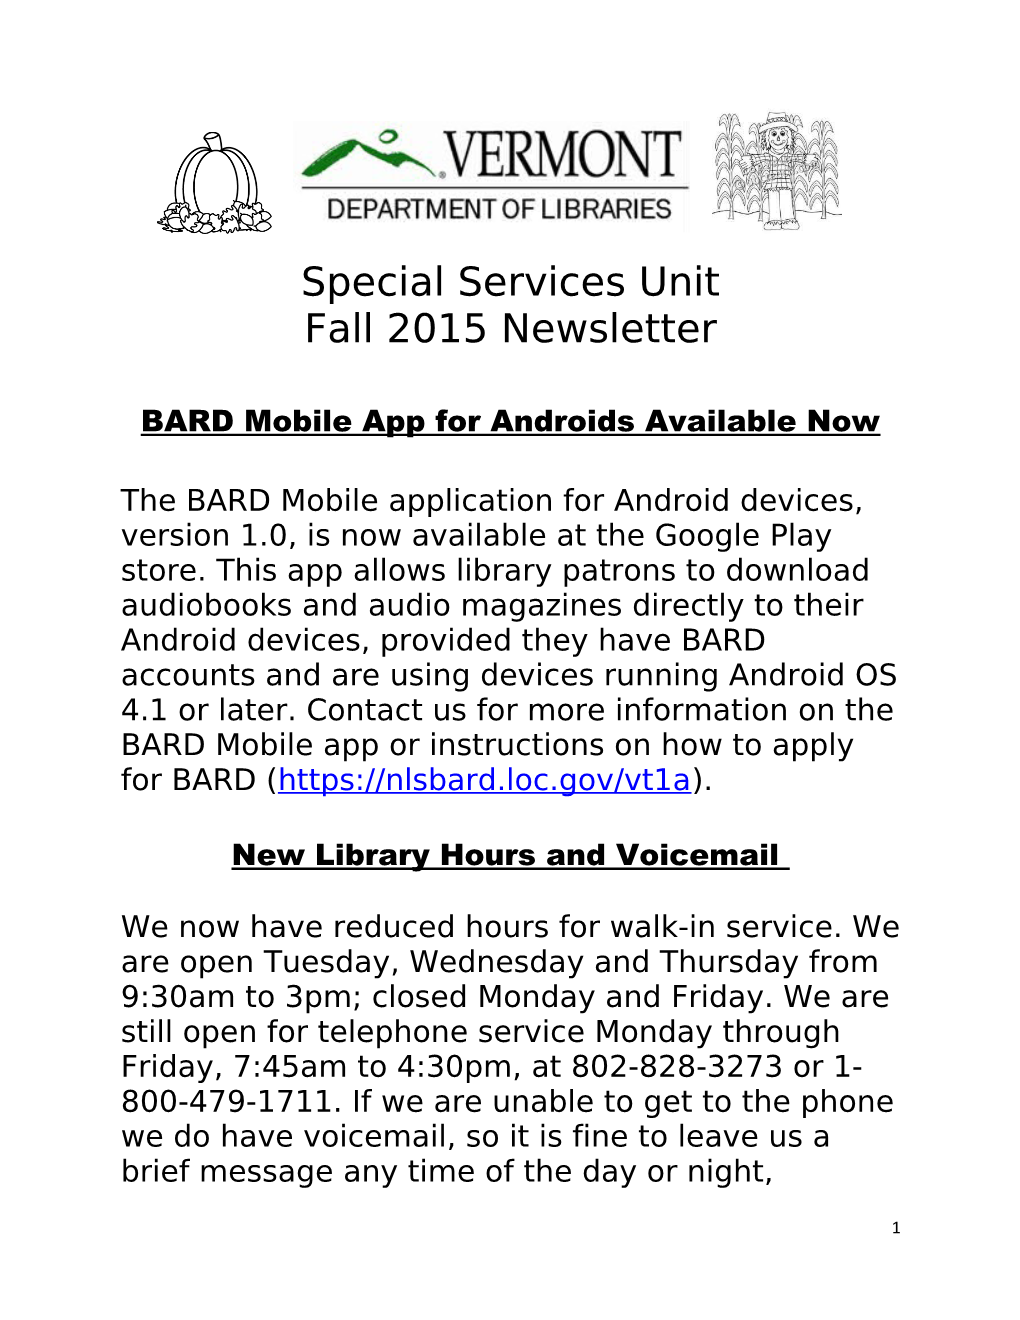 BARD Mobile App for Androids Available Now